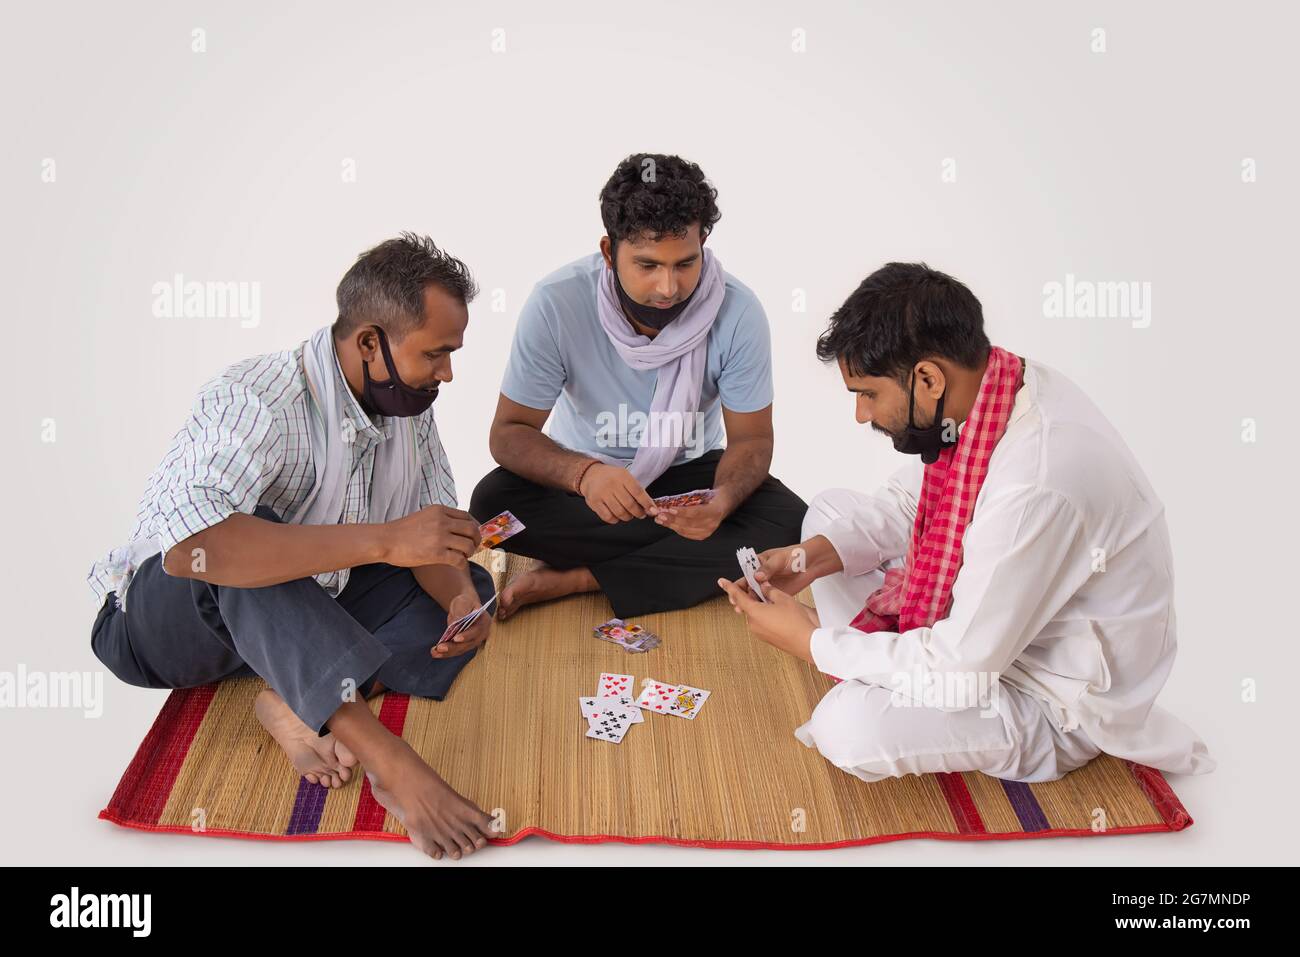 A GROUP OF COMMON MEN SITTING TOGETHER AND PLAYING CARDS Stock Photo